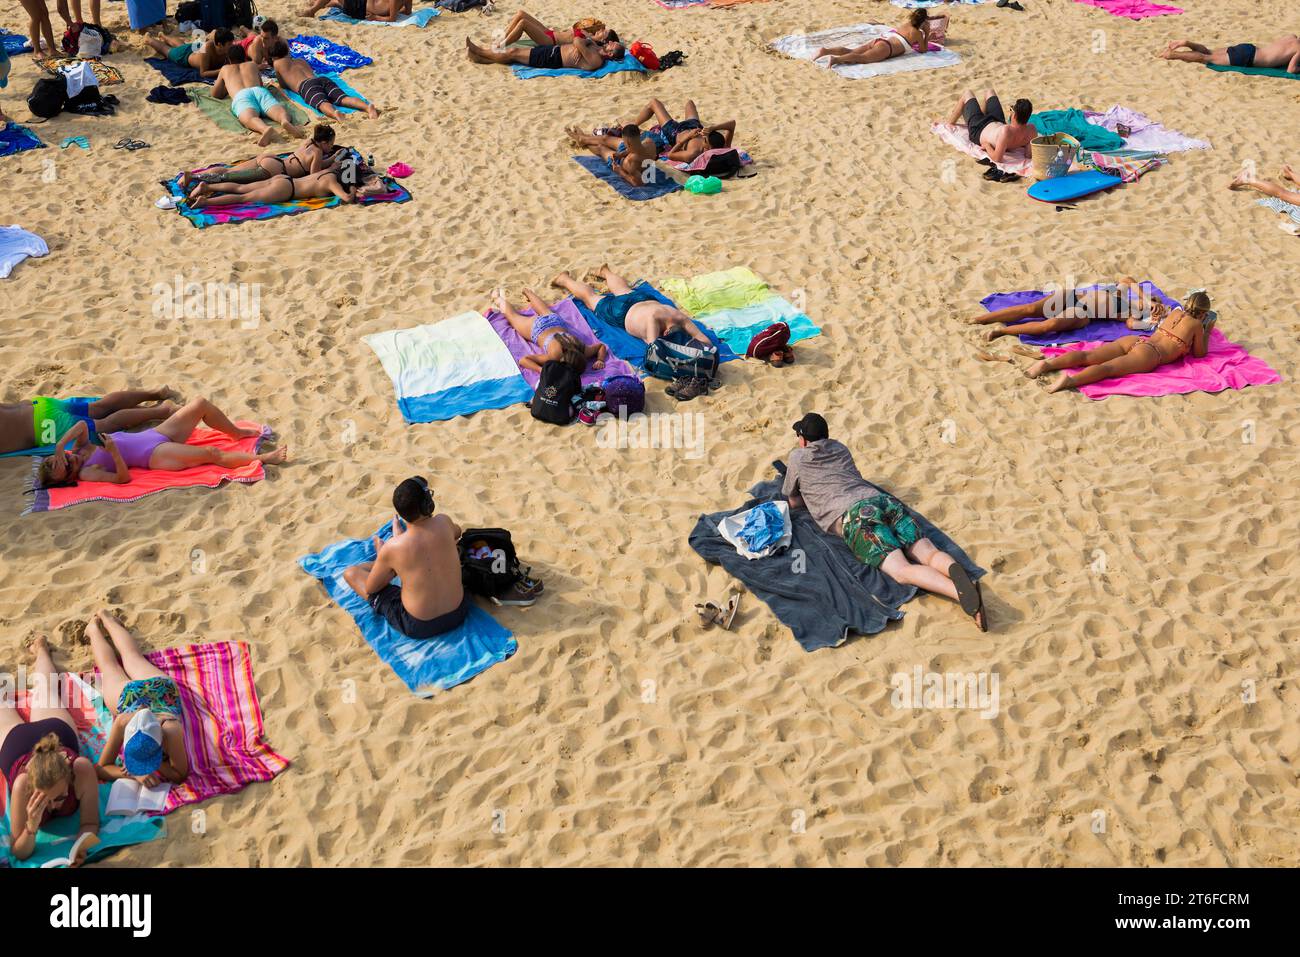 Crowded beach with people in August, San Sebastian, Donostia, Basque Country, Northern Spain, Spain Stock Photo